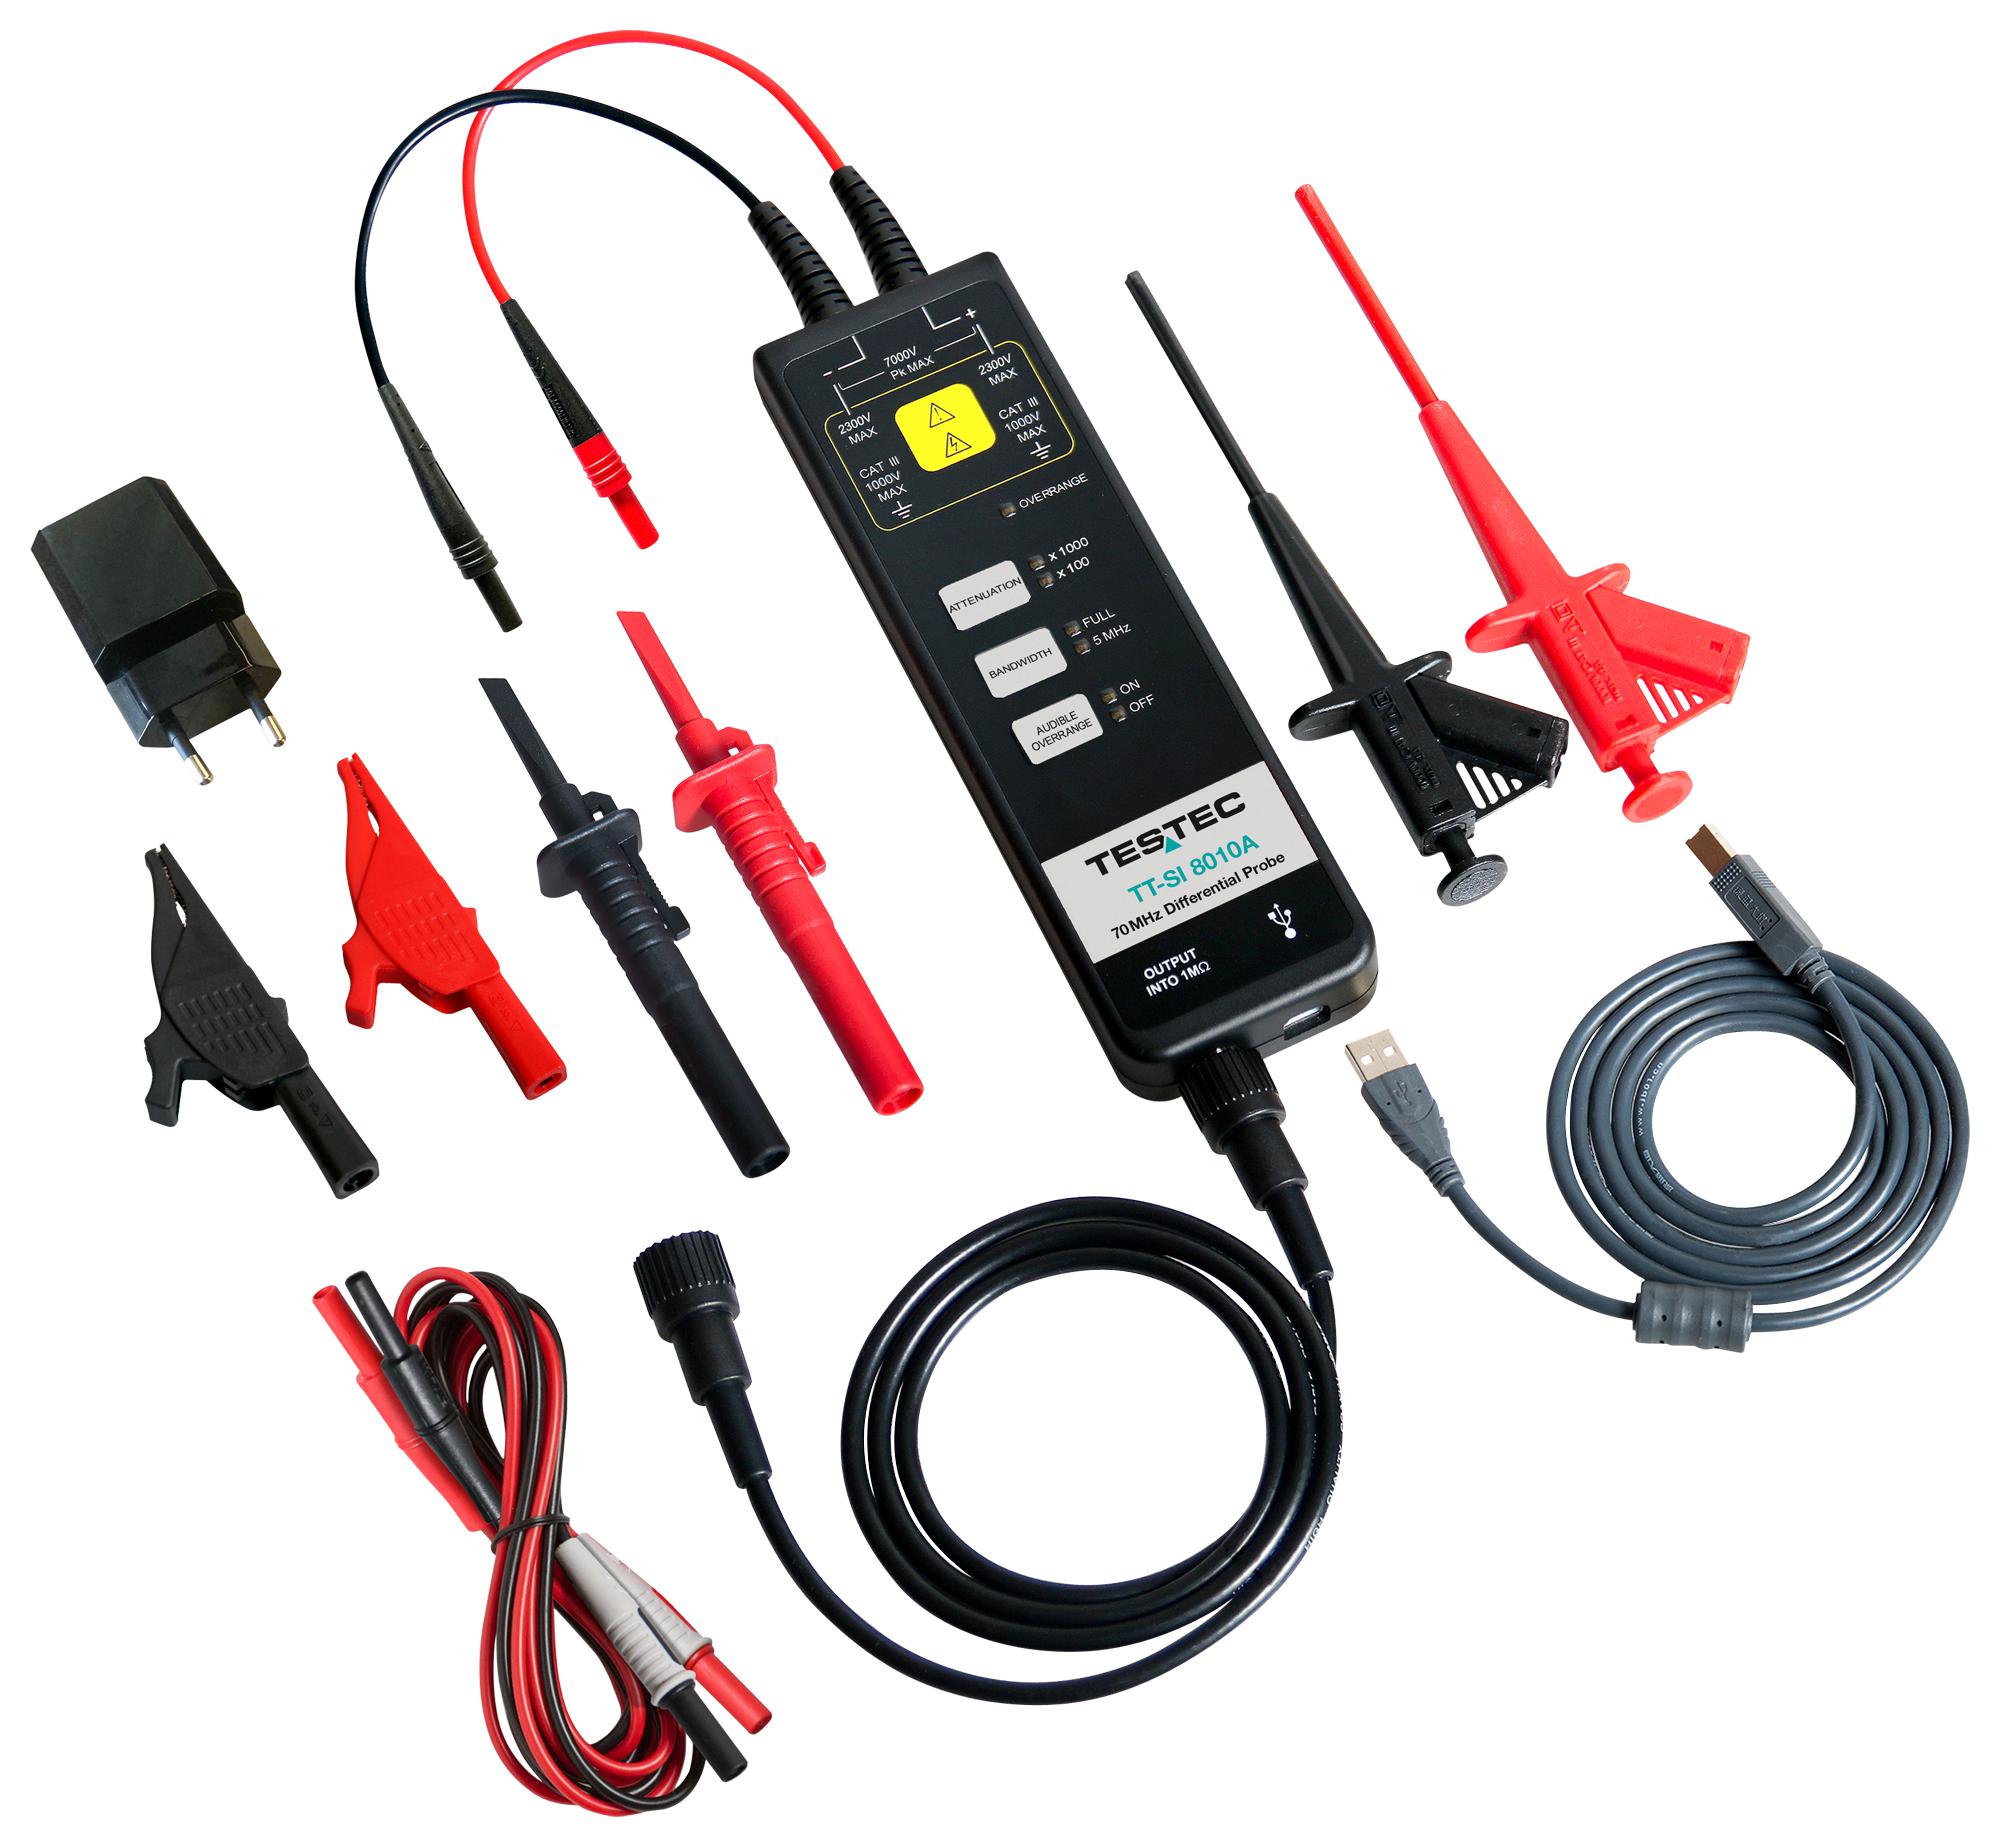 TT-SI 8010A ACTIVE DIFFERENTIAL PROBE, 70MHZ, OSC TESTEC